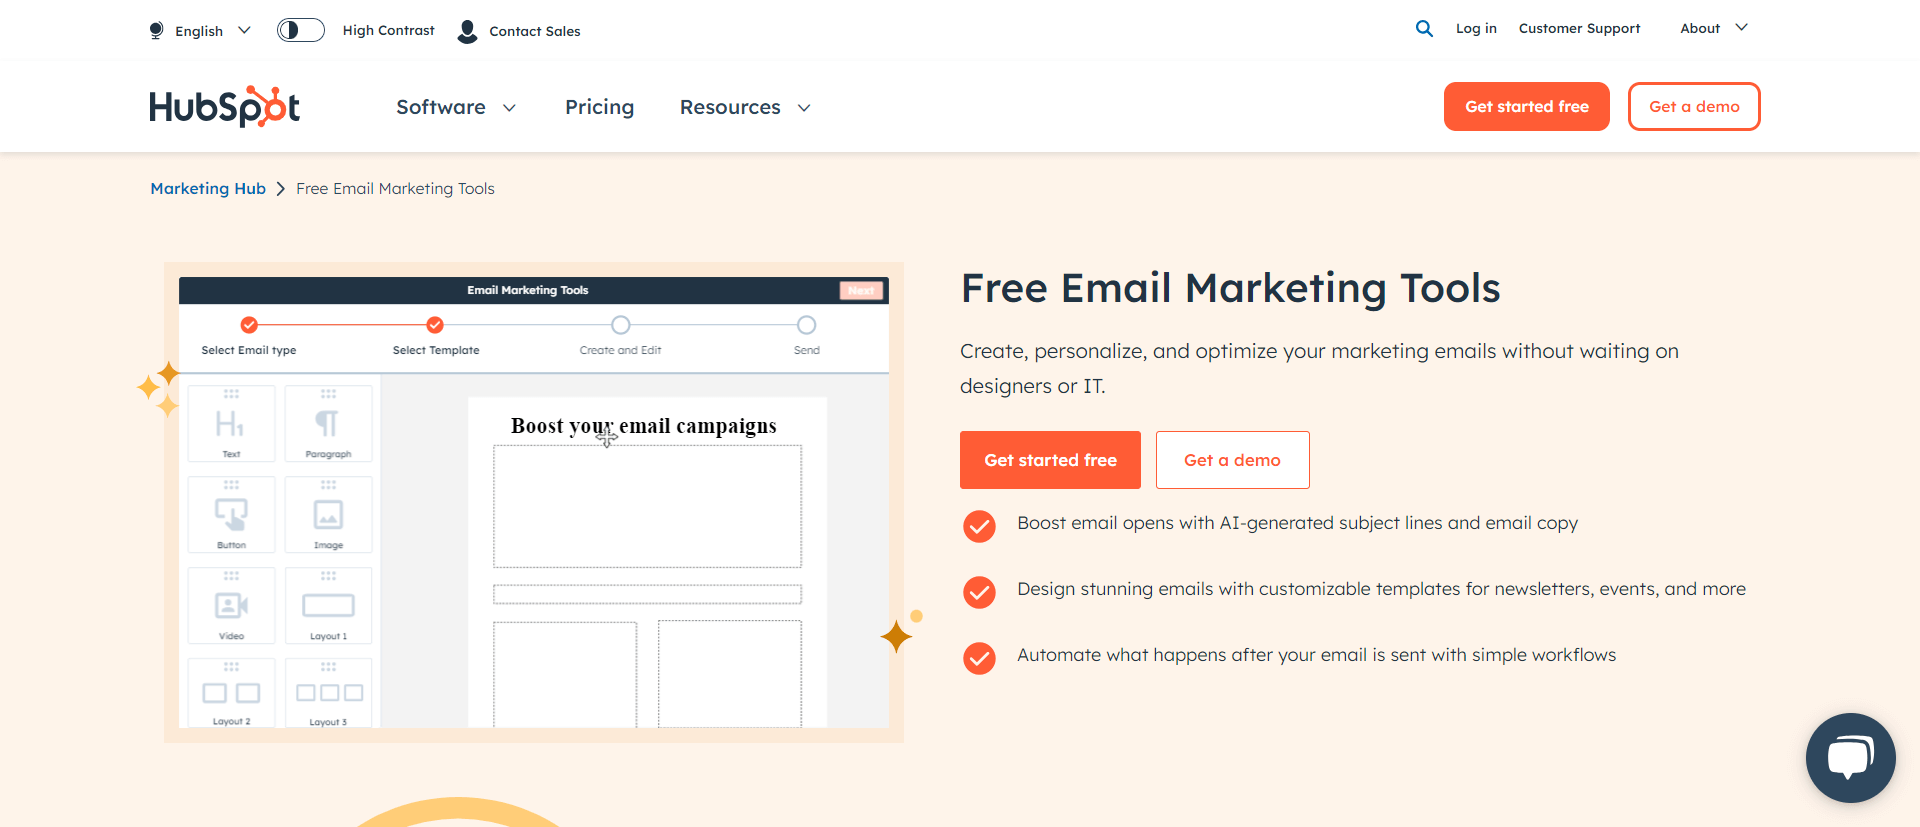 #10 Hubspot is the best email marketing platform for online stores